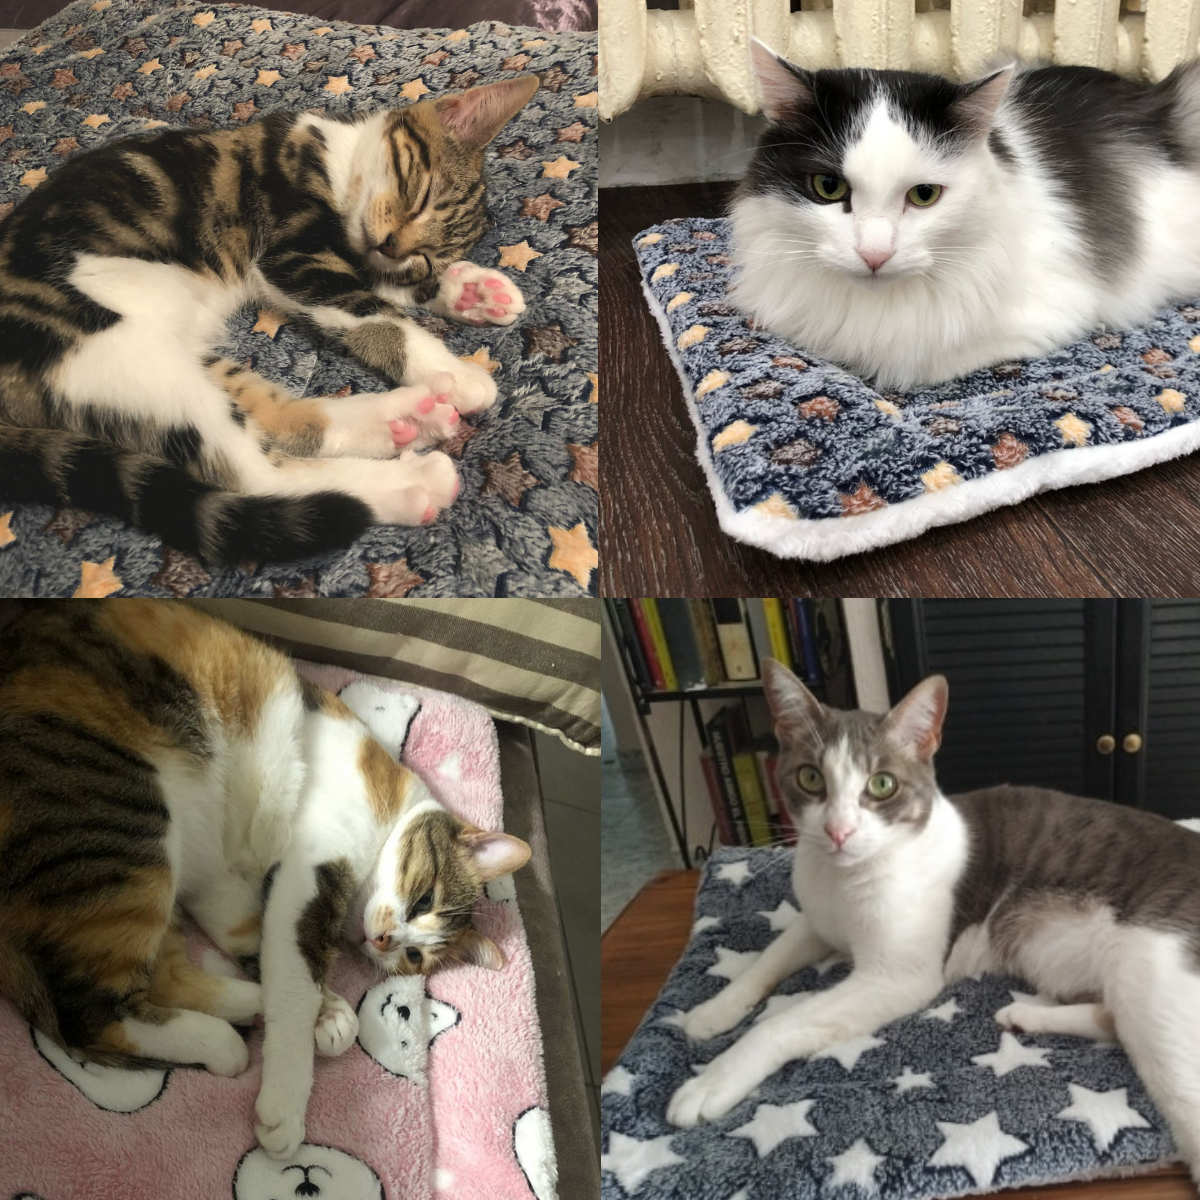 ⚡⚡Last Day Promotion 48% OFF - Calming Cat Blanket🔥🔥BUY 2 GET 1 FREE)